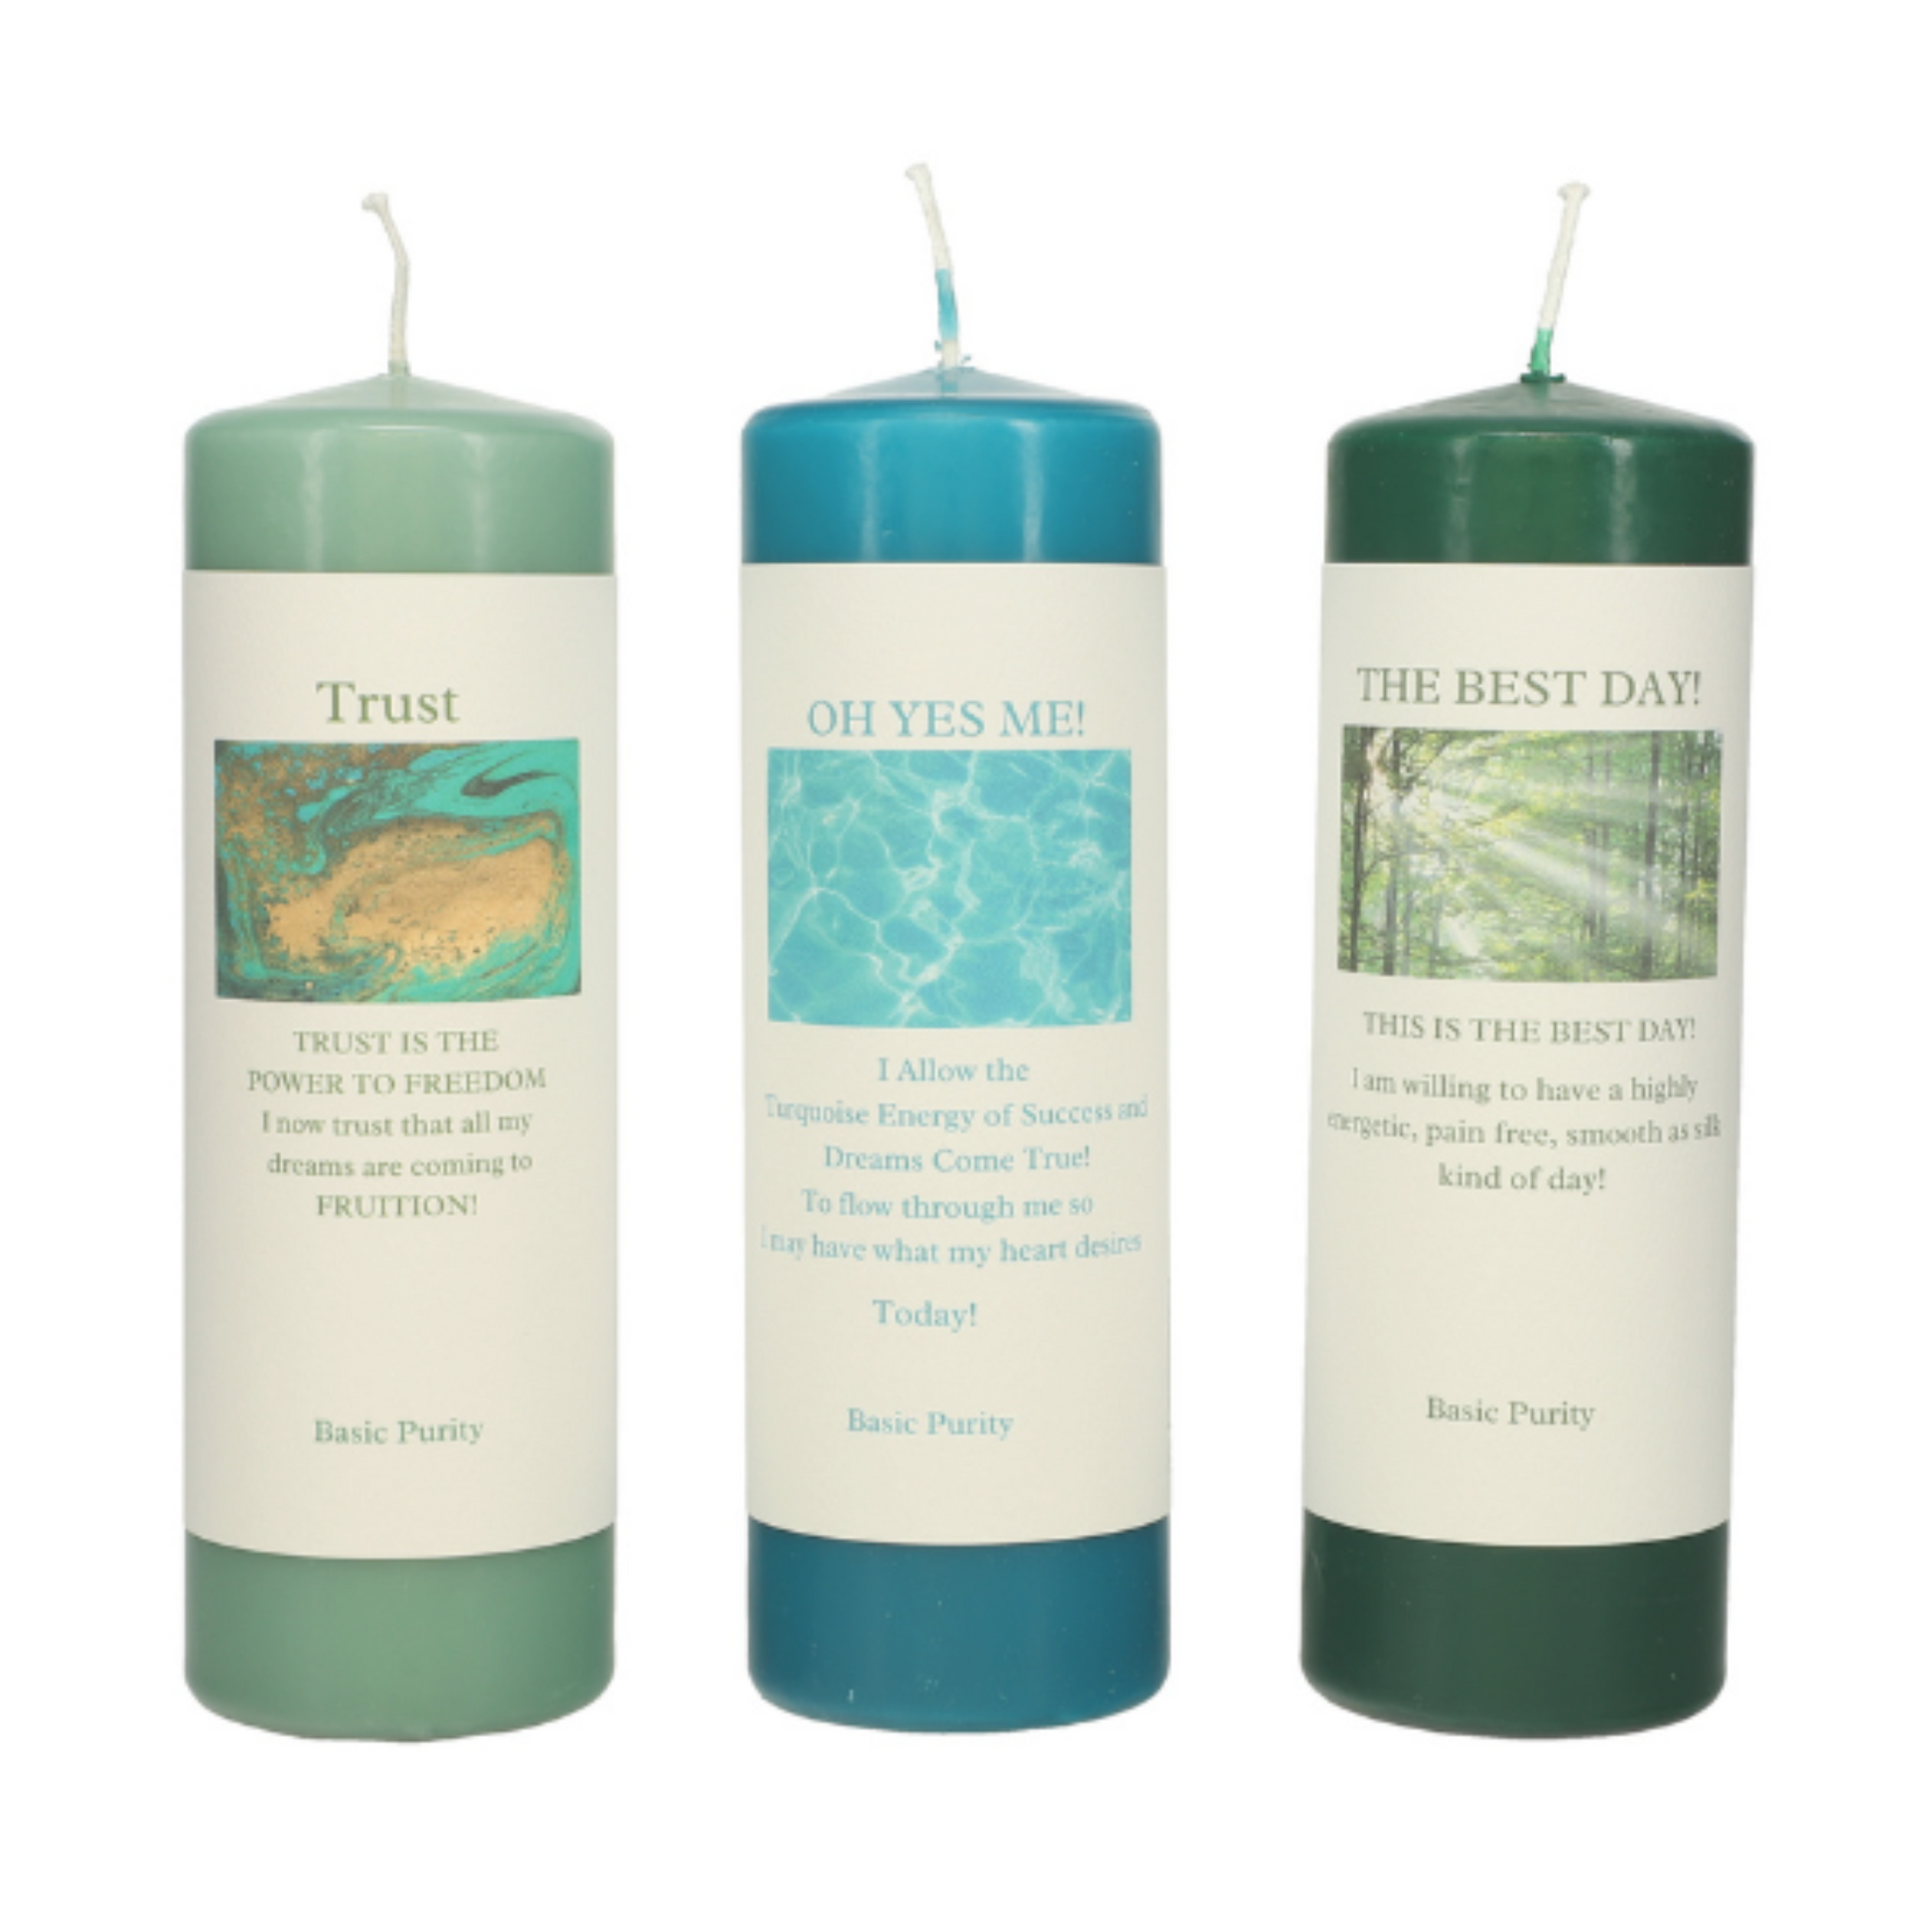 trust, success, and "the best day" meditation candle set